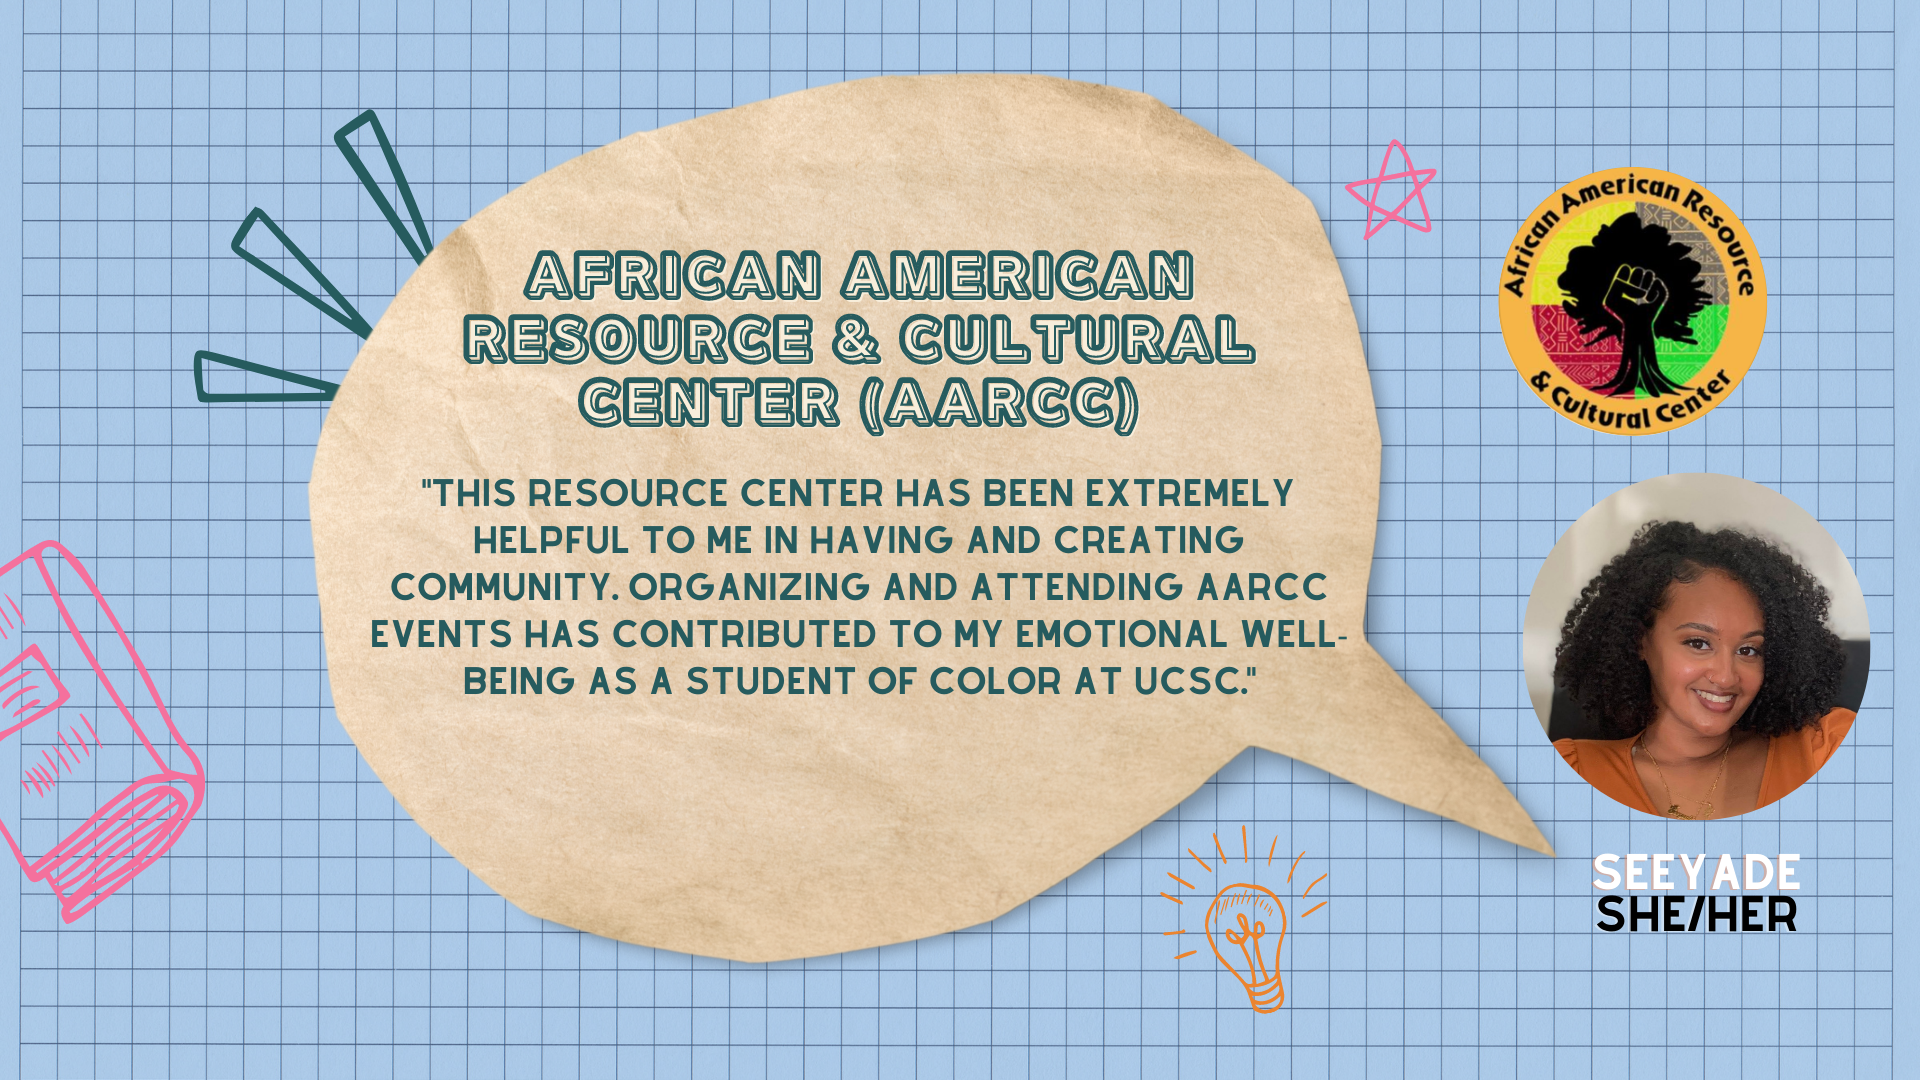 quote: "This resource center has been extremely helpful to me in having and creating community. Organizing and attending AARCC events has contributed to my emotional well-being as a student of color at UCSC."